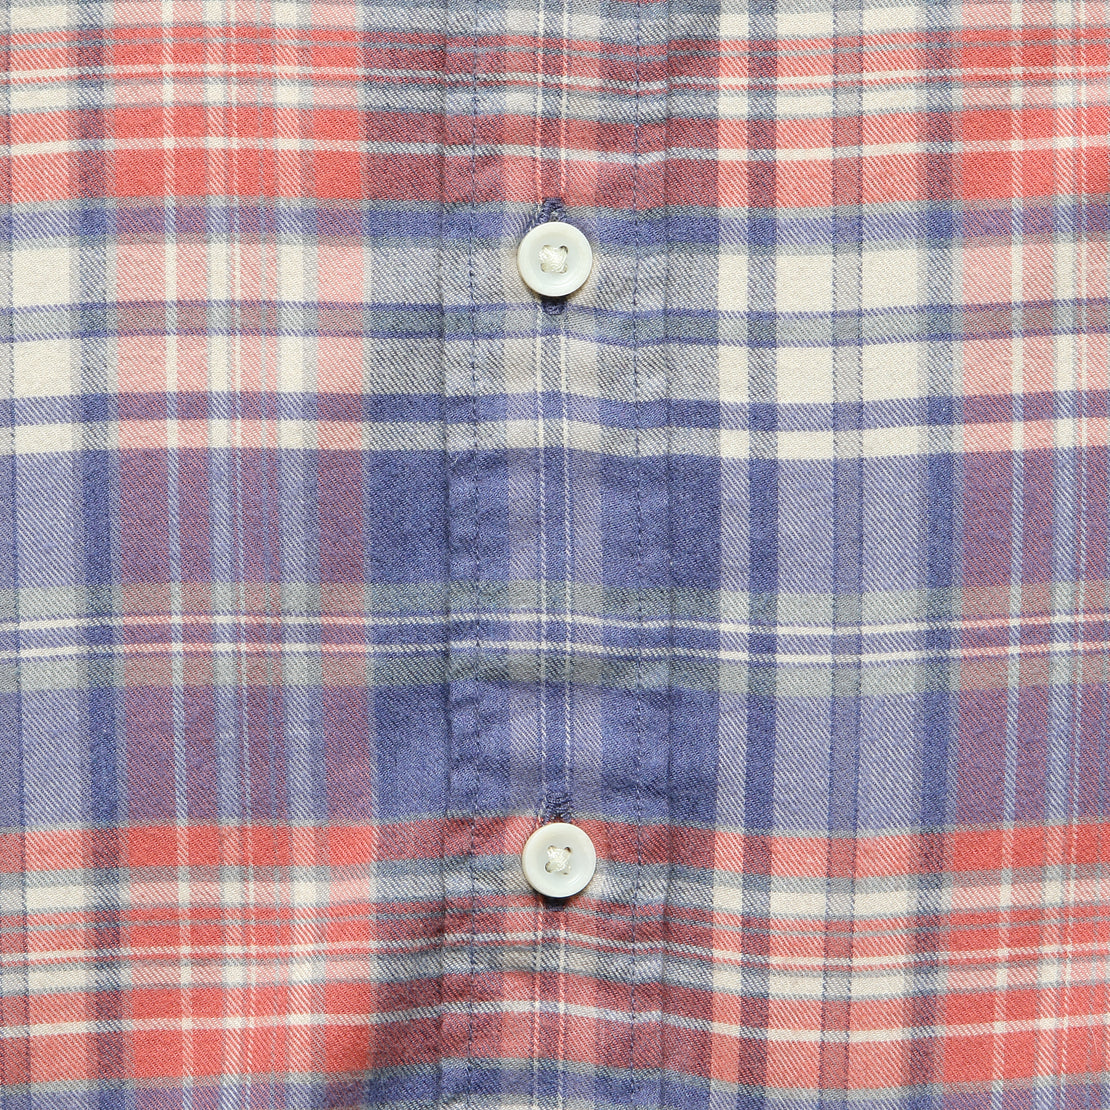 All Time Shirt - Autumn Plaid - Faherty - STAG Provisions - Tops - L/S Woven - Plaid